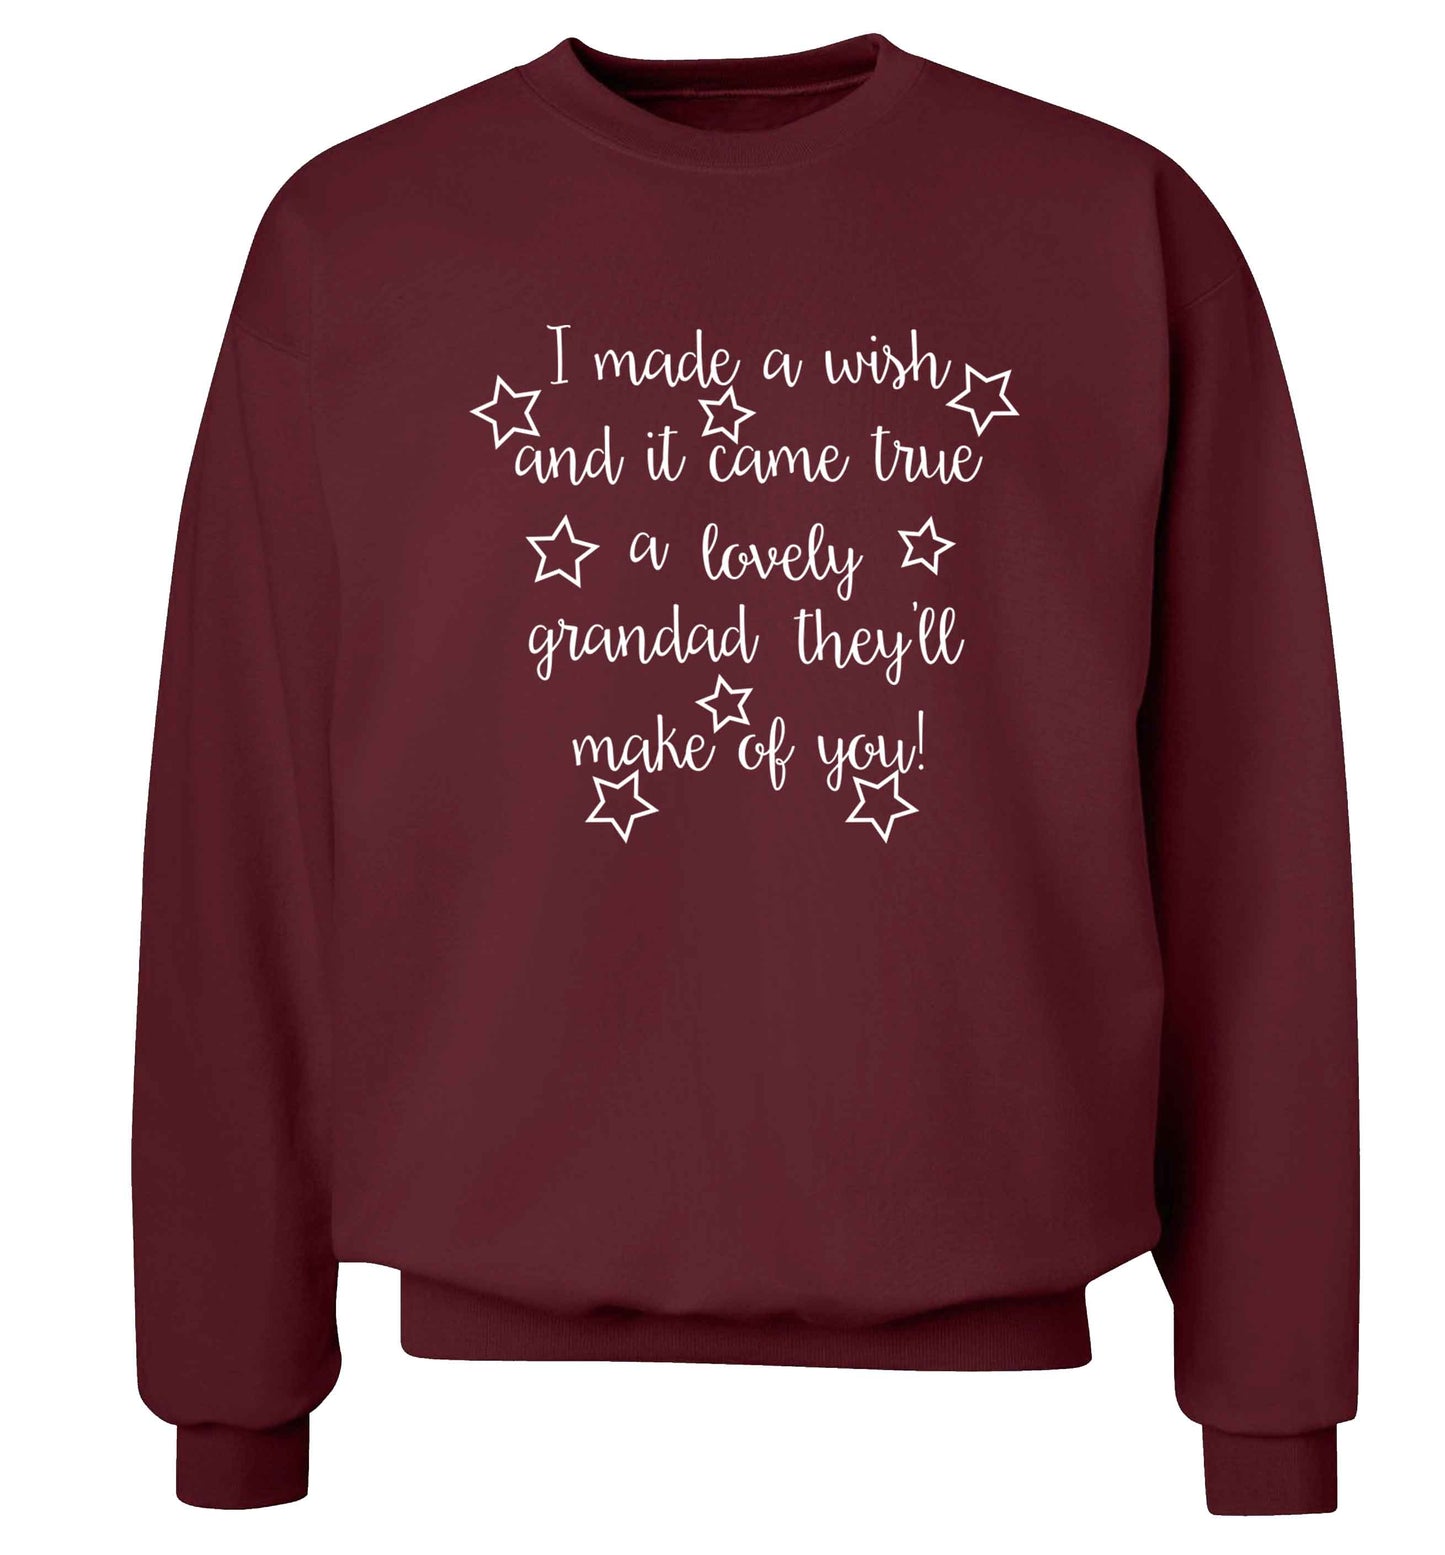 I made a wish and it came true a lovely grandad they'll make of you! Adult's unisex maroon Sweater 2XL